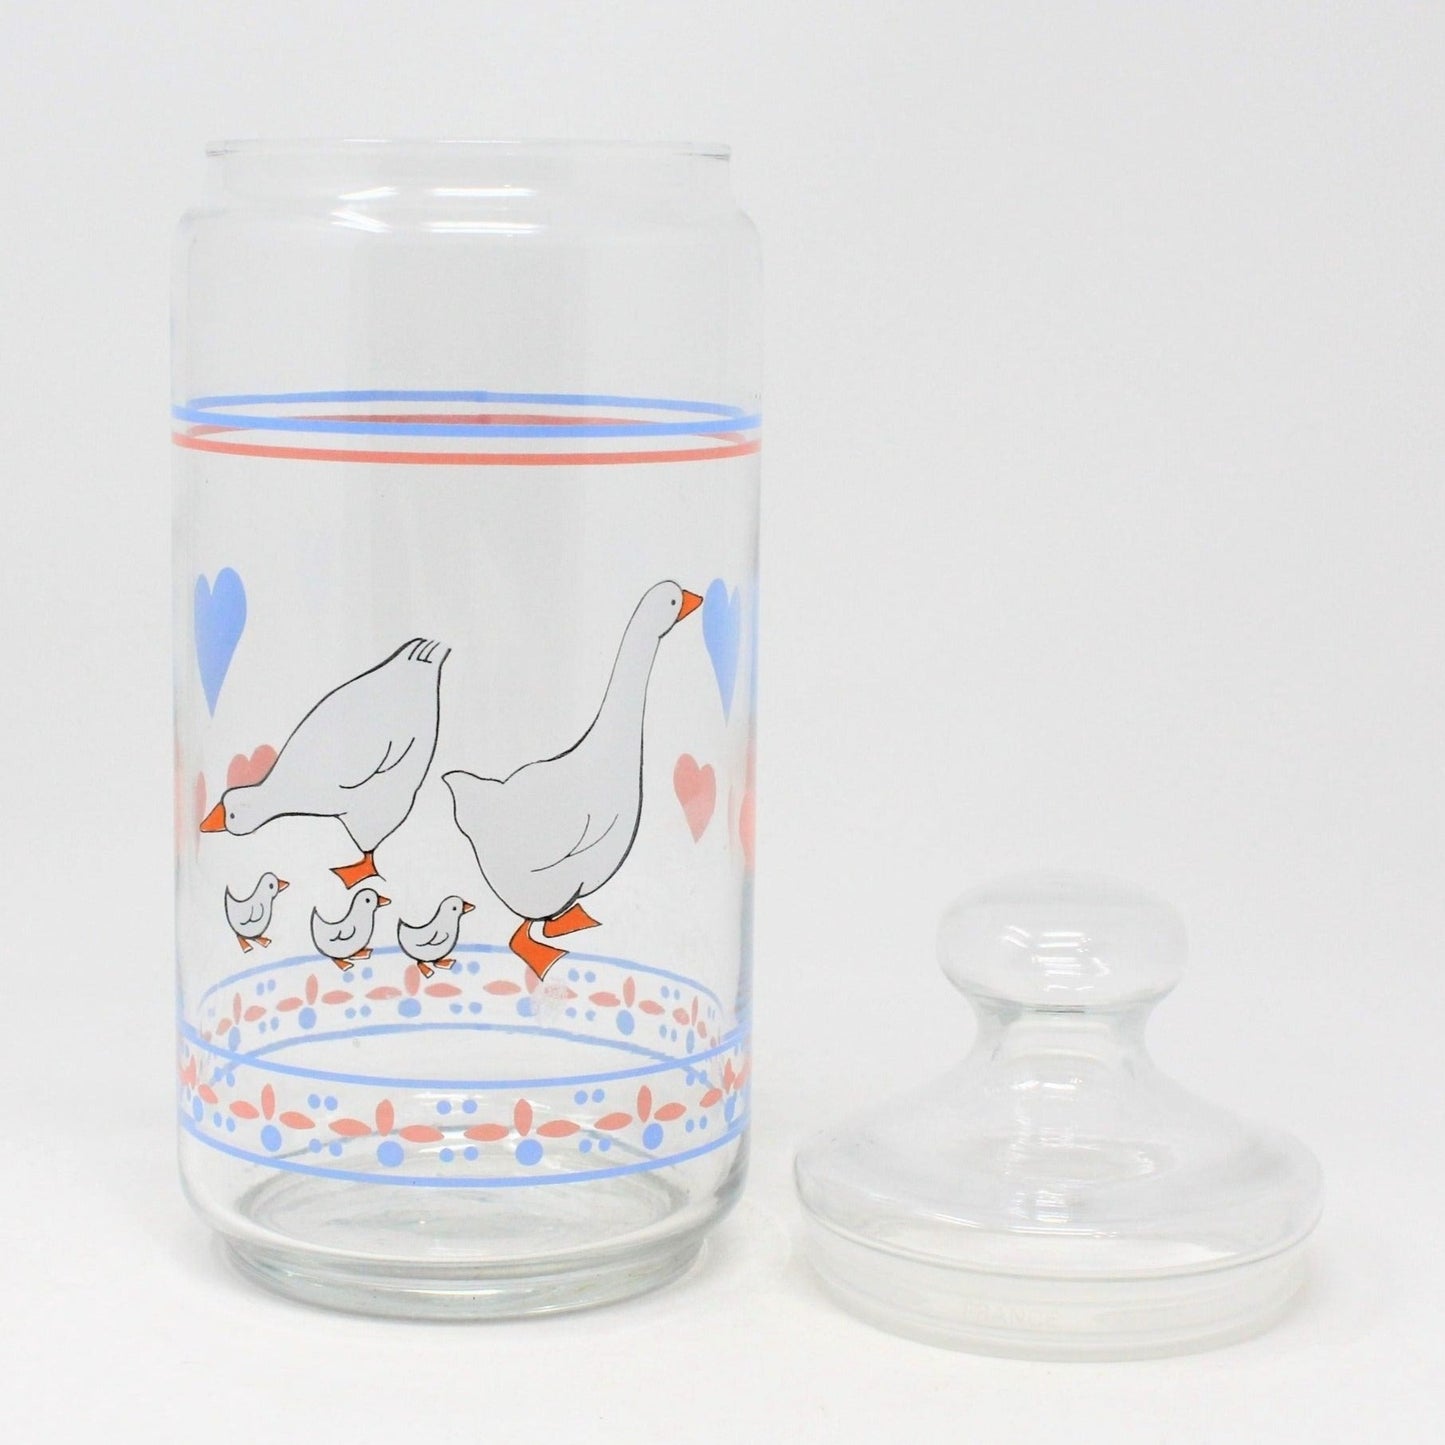 Storage Canister, Luminarc, Apothecary Jar, Hearts & Geese, France, Vintage